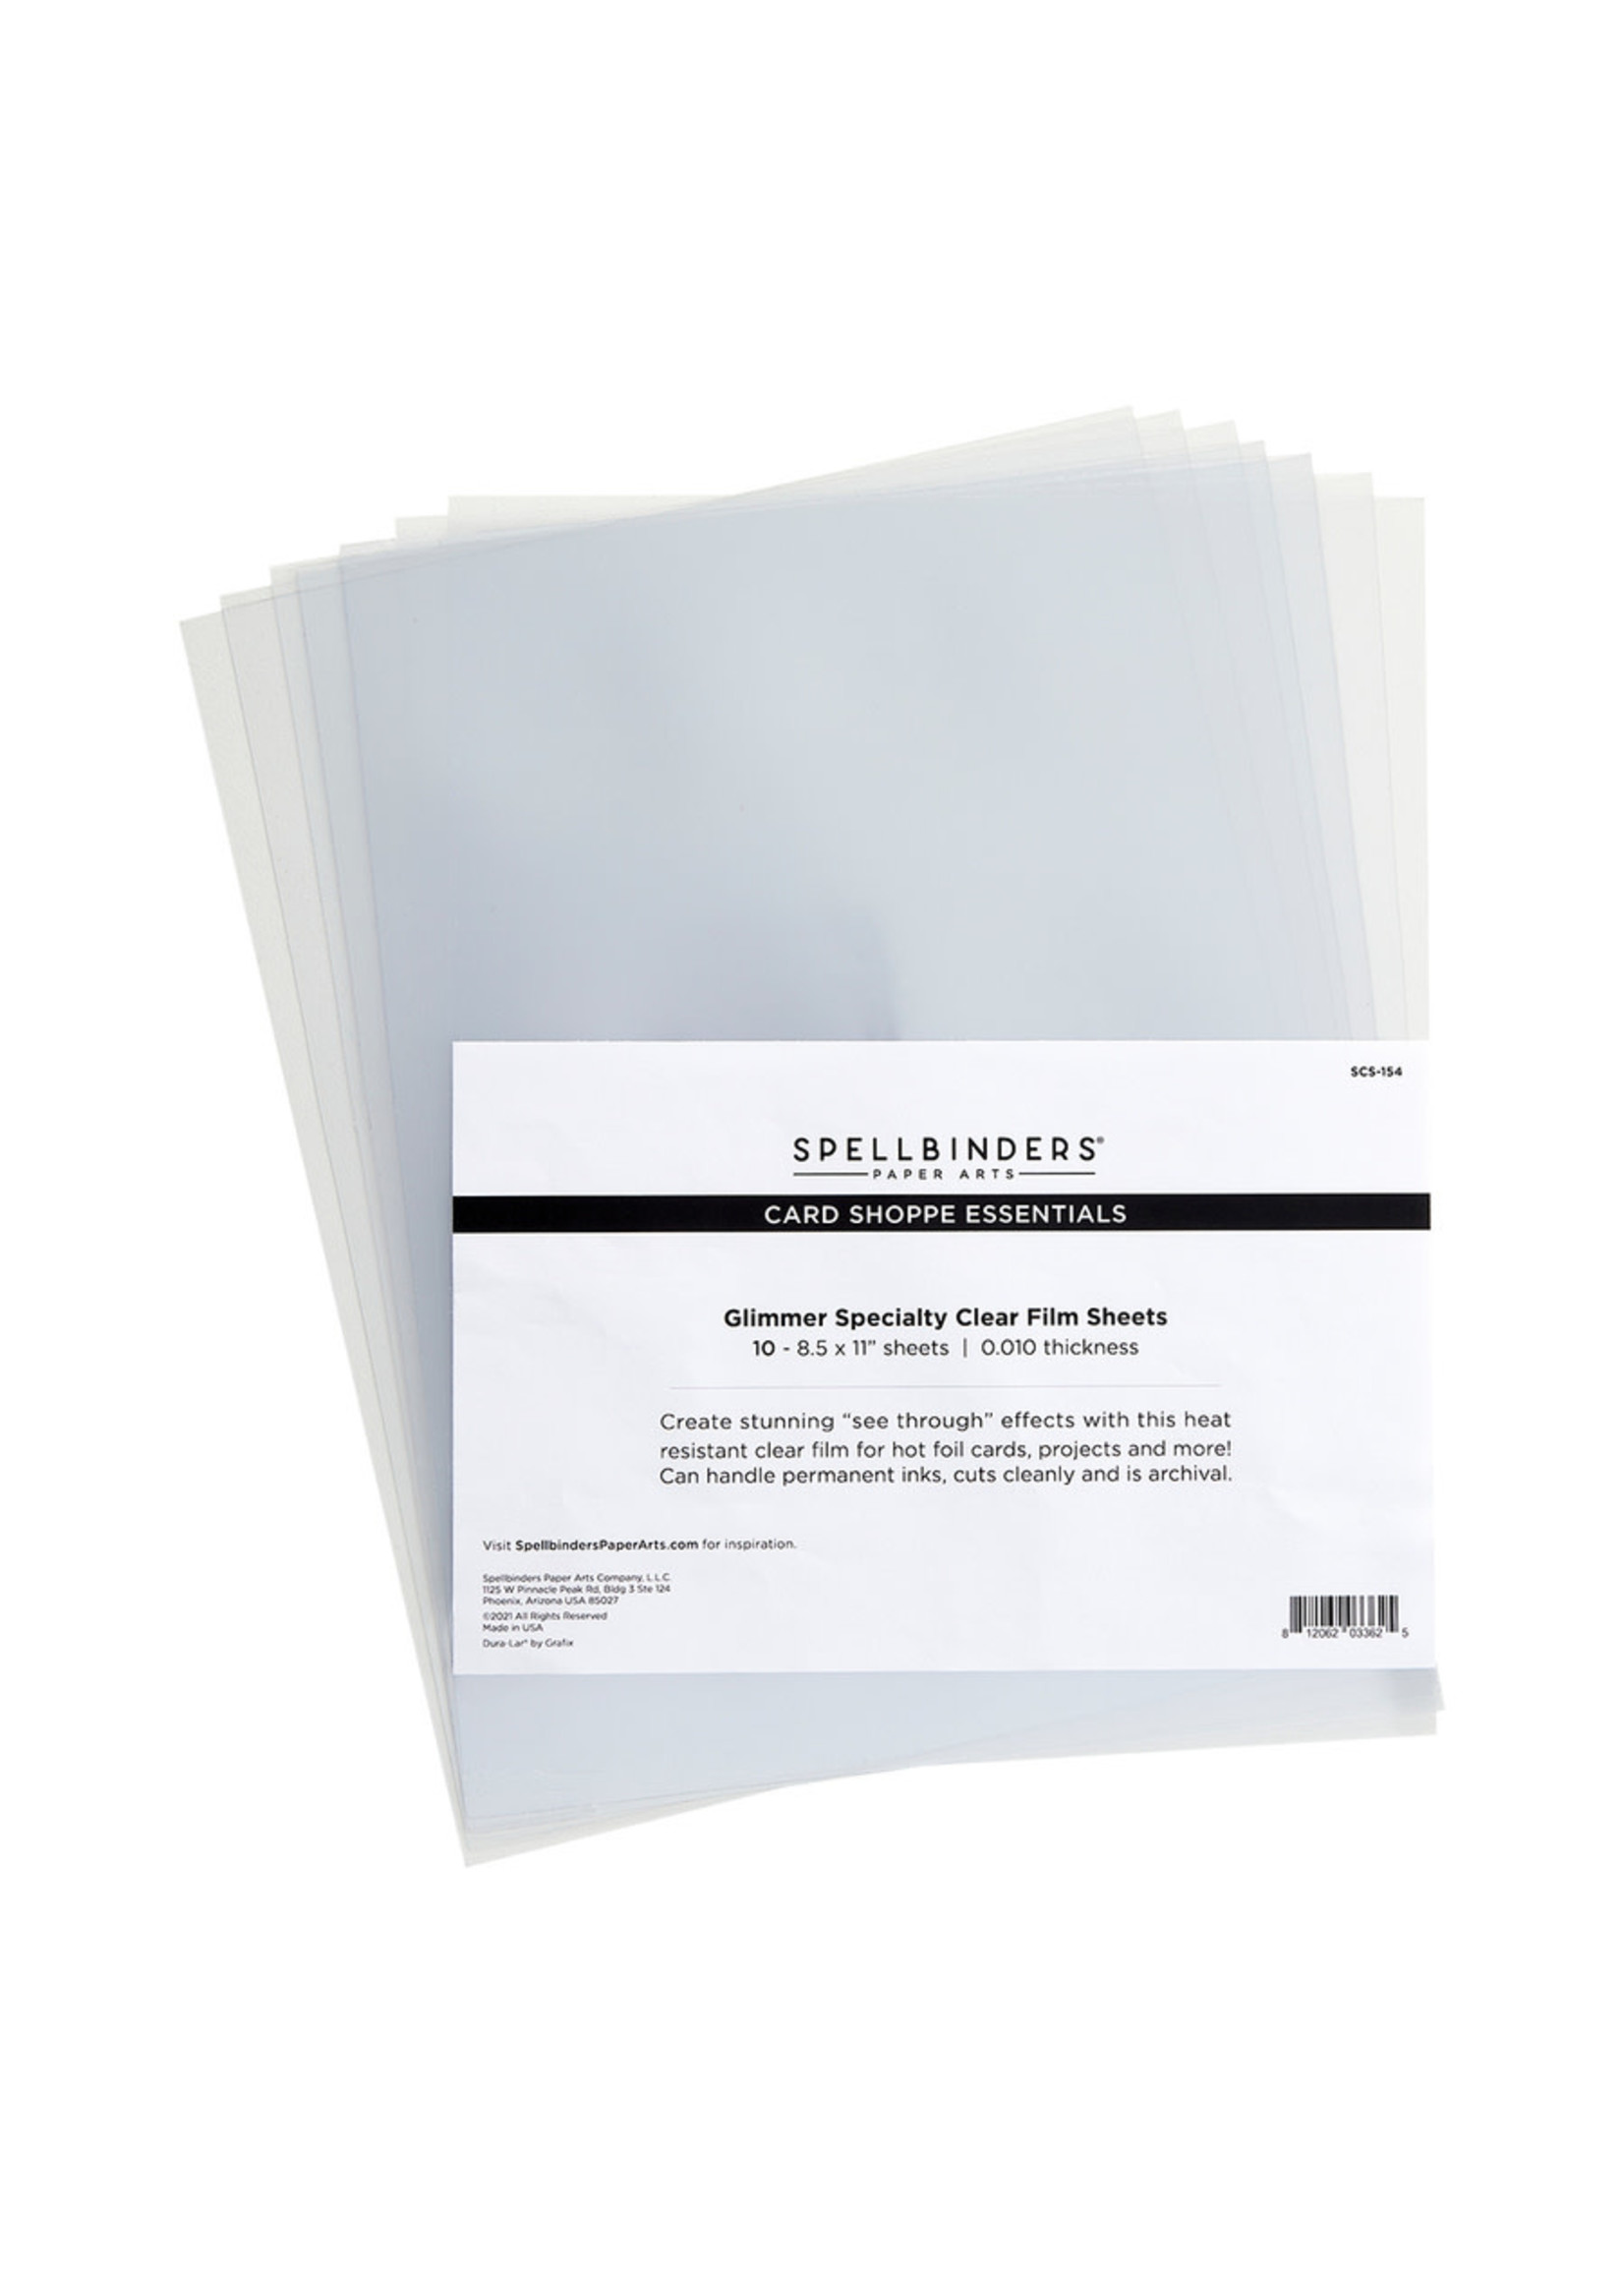 spellbinders Glimmer Specialty Clear Film Sheets